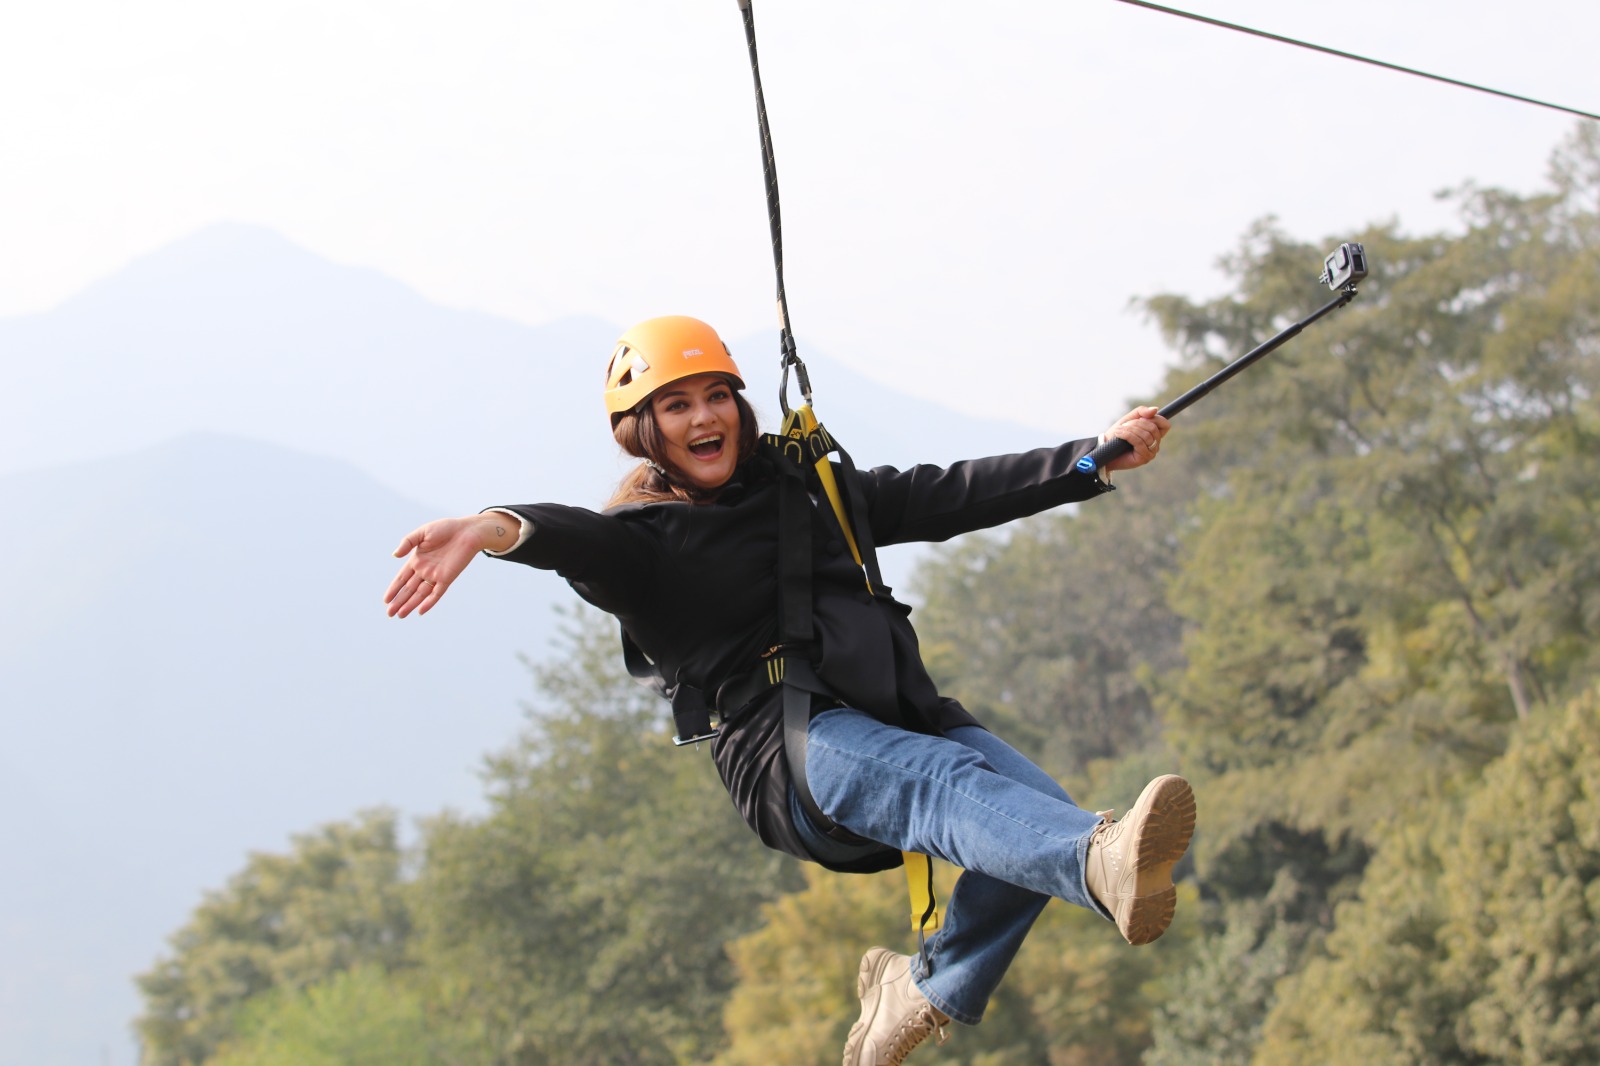 Canopy Zipline commences its operation at Chobar